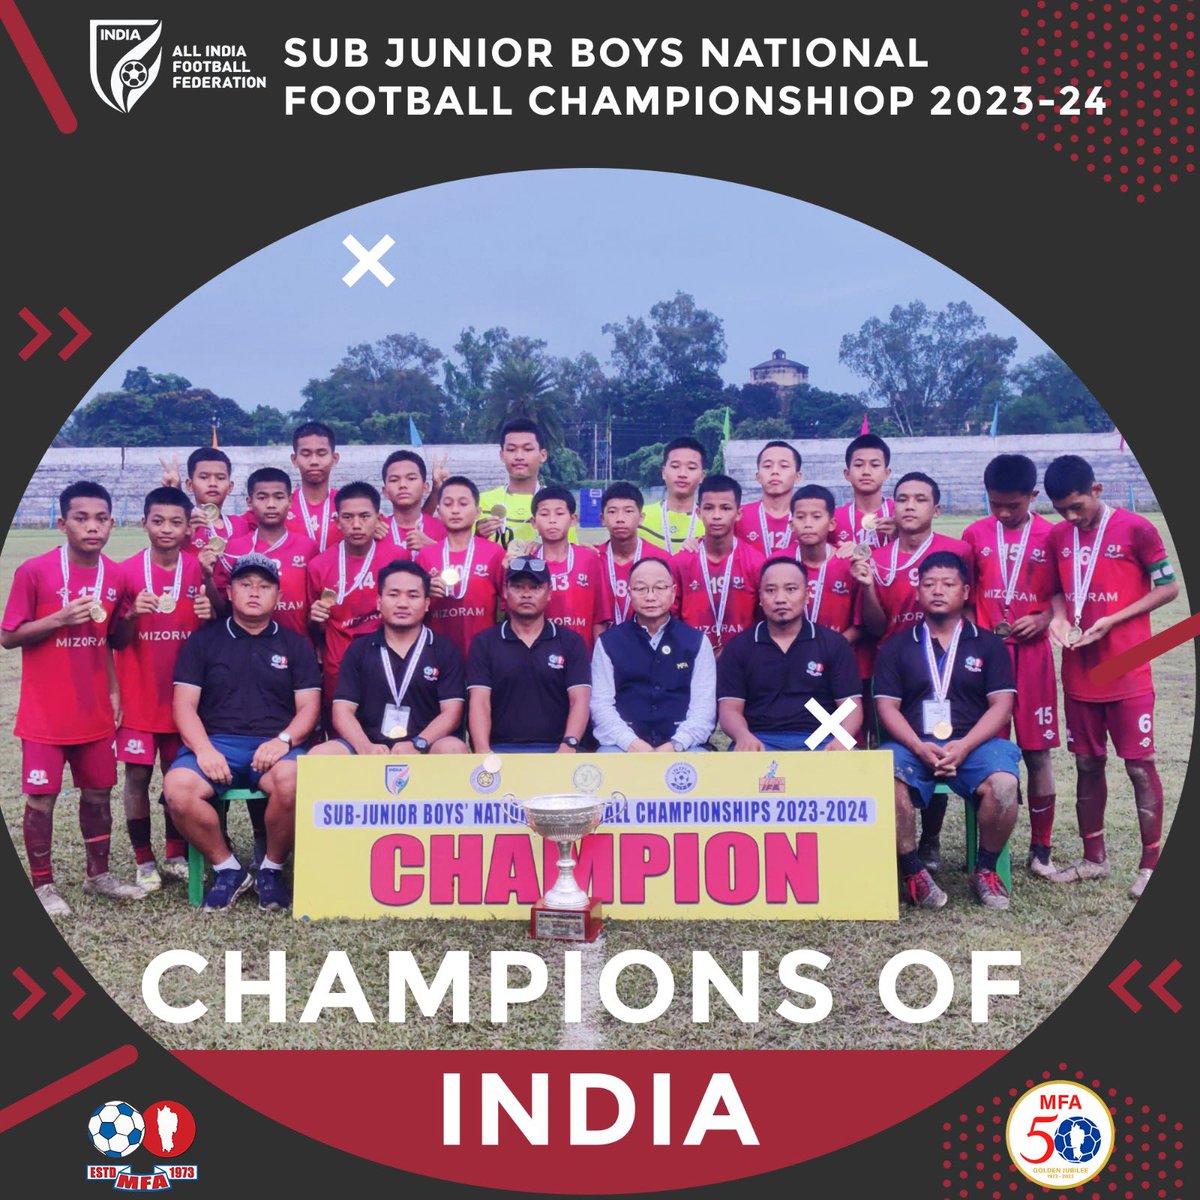 Huge congratulations to the incredible Mizoram team for their stellar performance in the Sub Junior Boys National Football Championship 2023-24! Your hard work and teamwork have truly paid off!